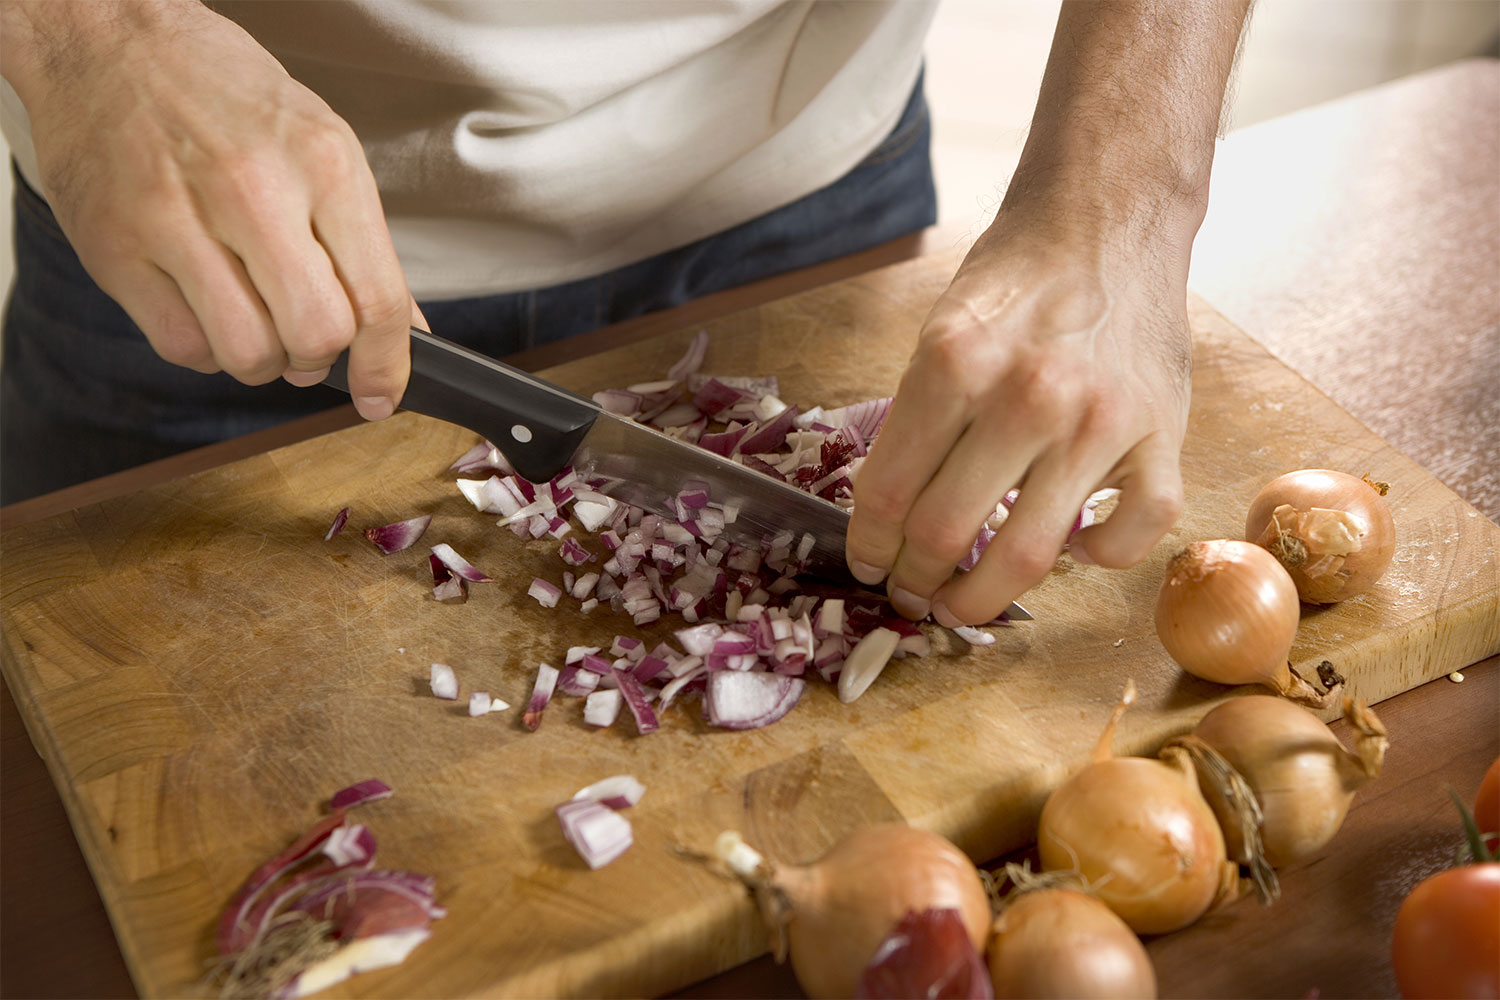 https://www.themanual.com/wp-content/uploads/sites/9/2020/07/chopping-onions-1.jpg?fit=800%2C533&p=1